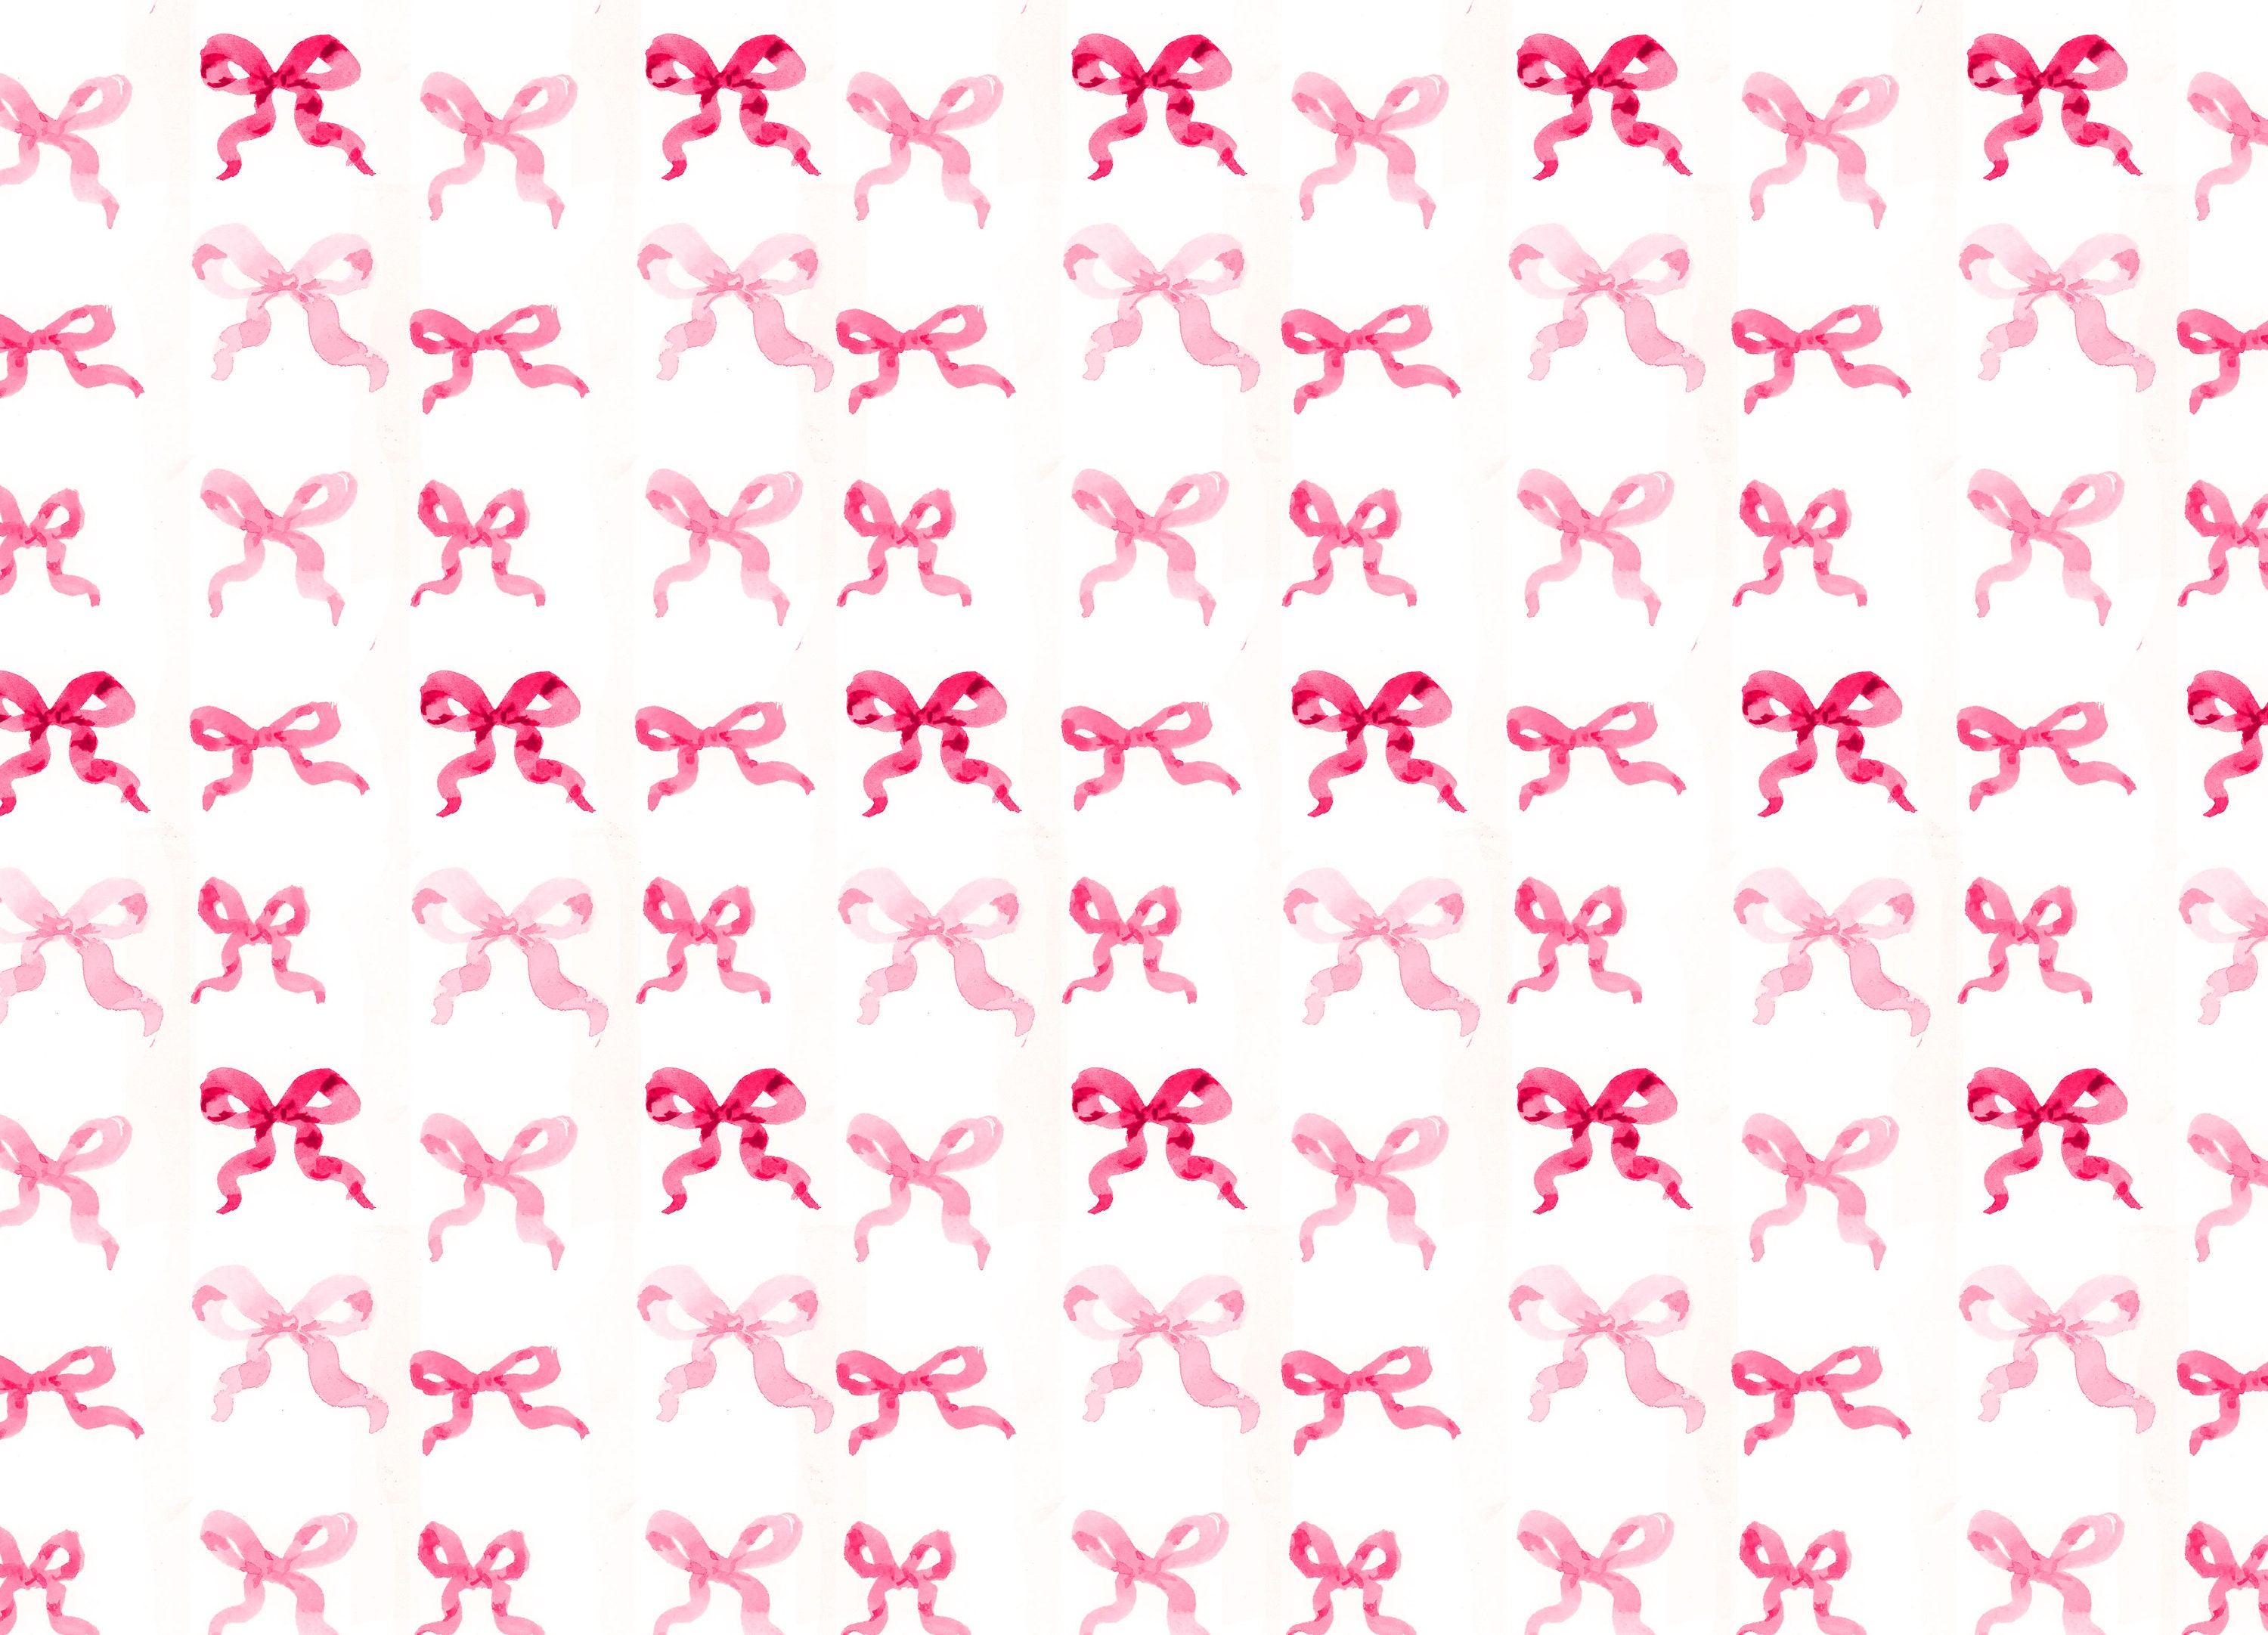 Wrapping Paper: Pink Bows 